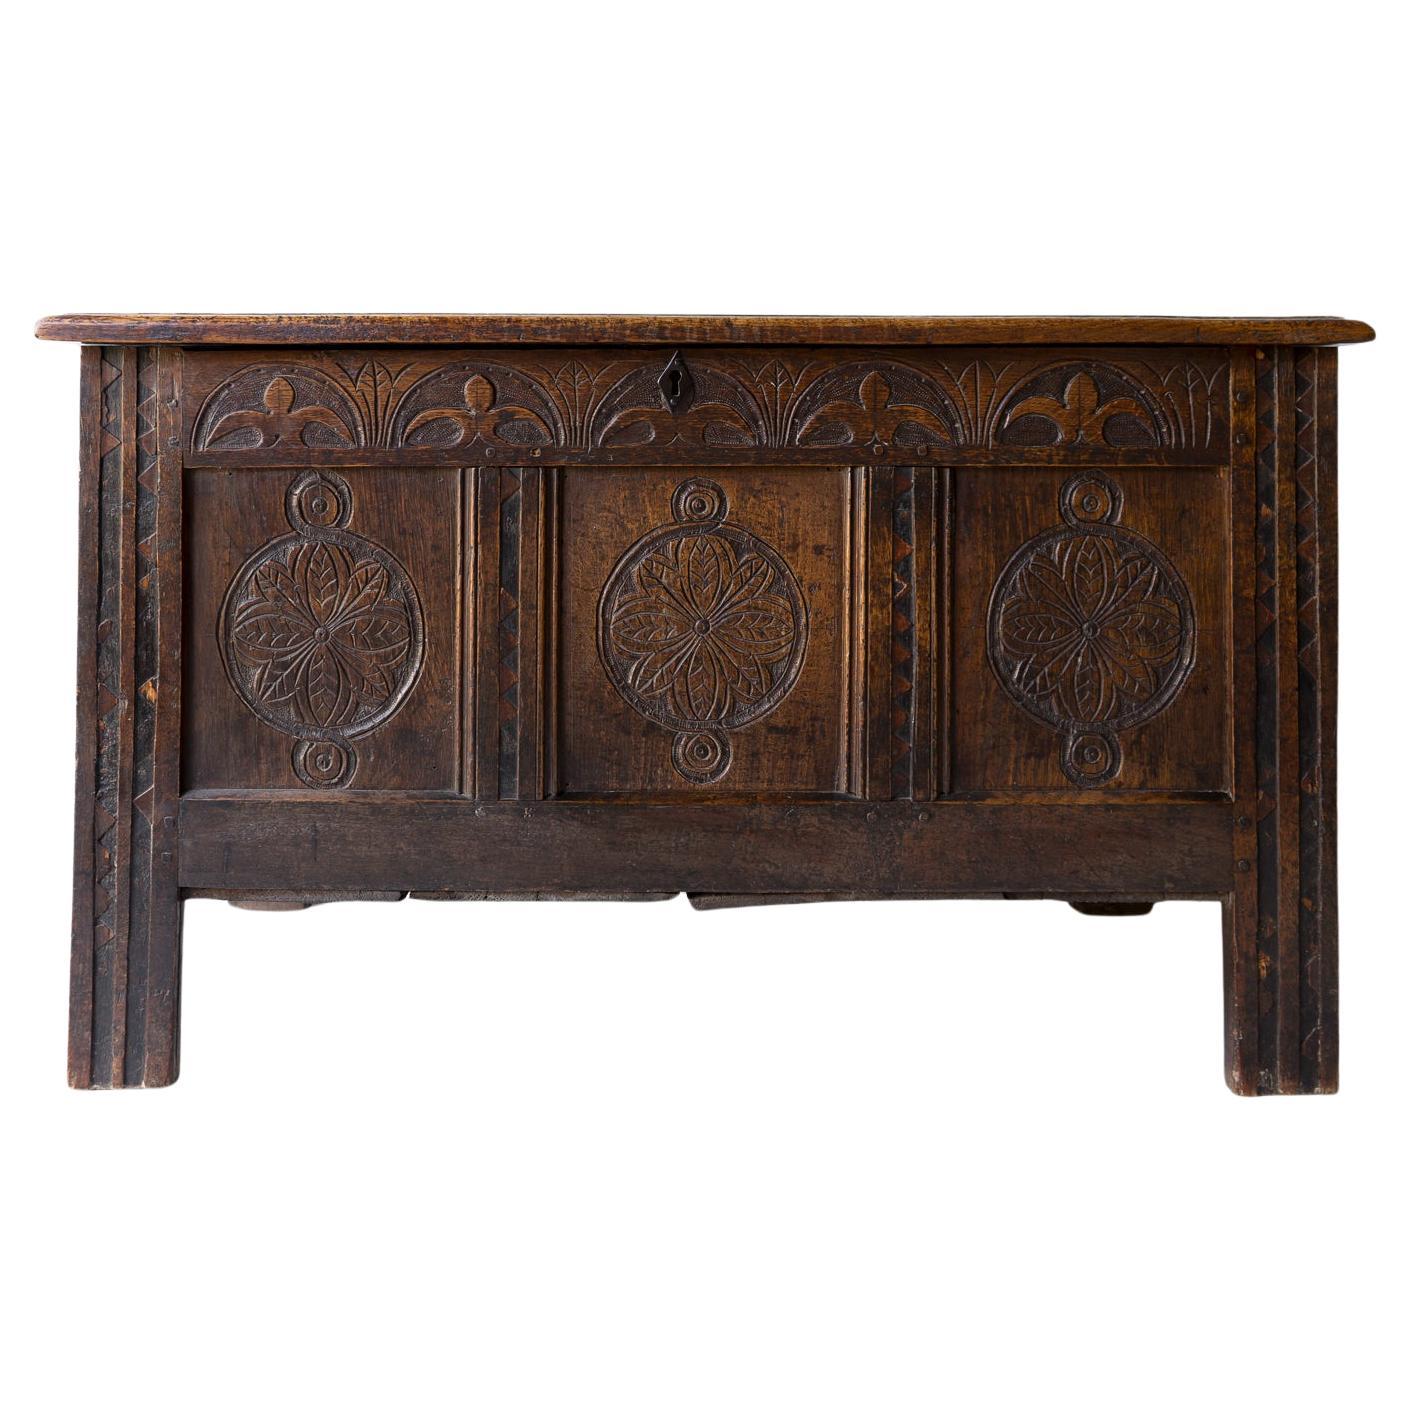 Antique Charles II West Country Carved Oak Coffer 17th Century Blanket Box Chest For Sale